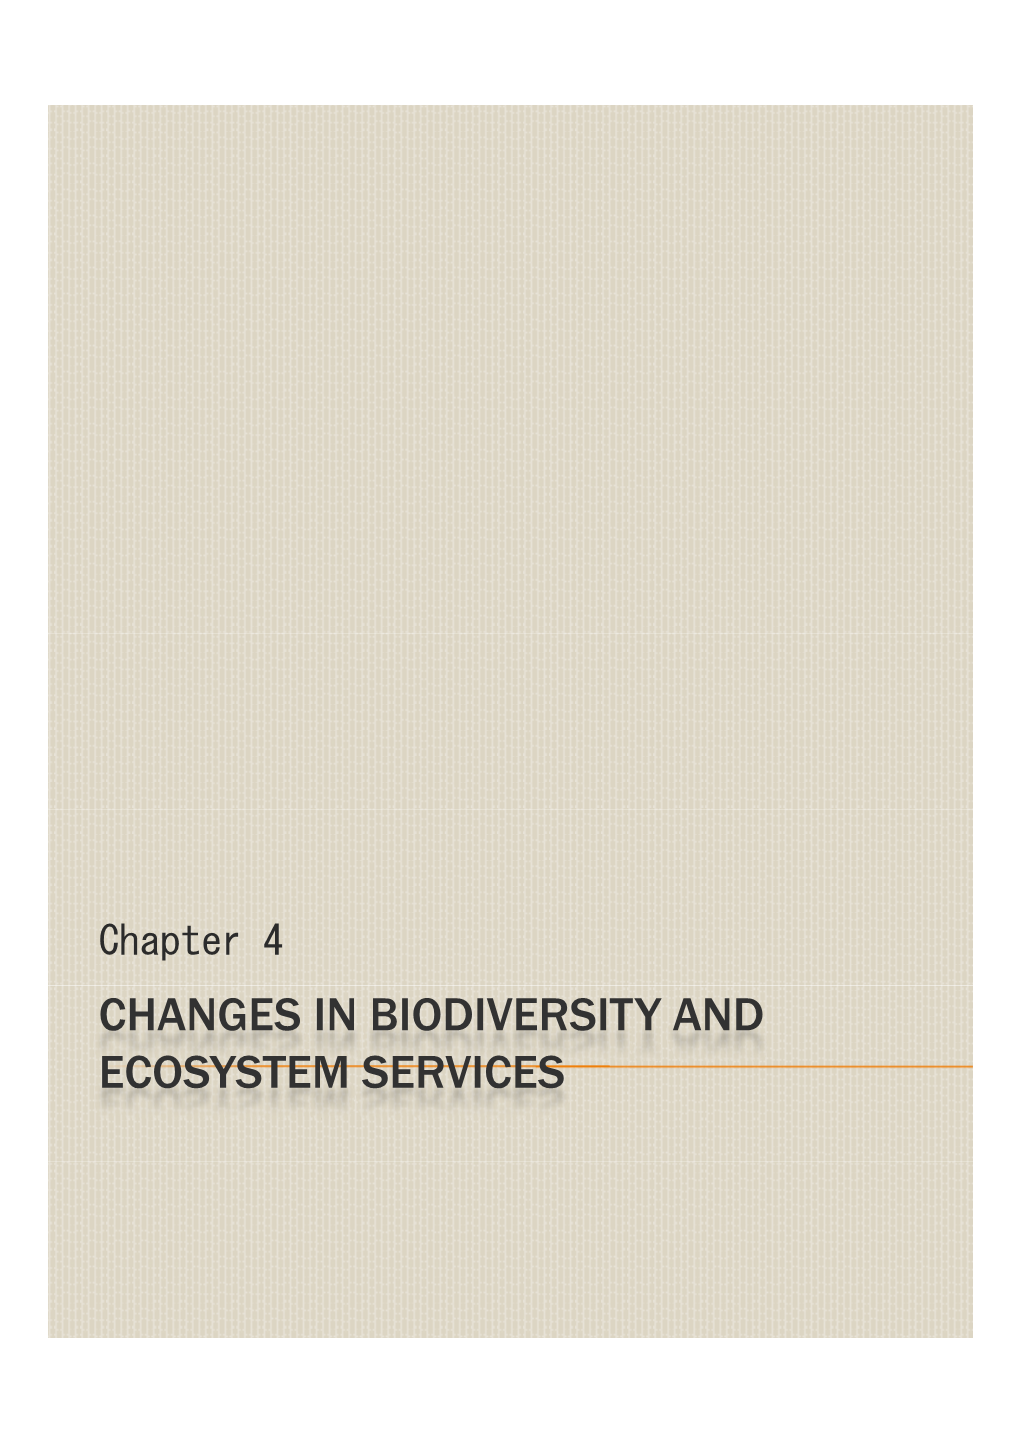 Changes in Biodiversity and Ecosystem Services 4